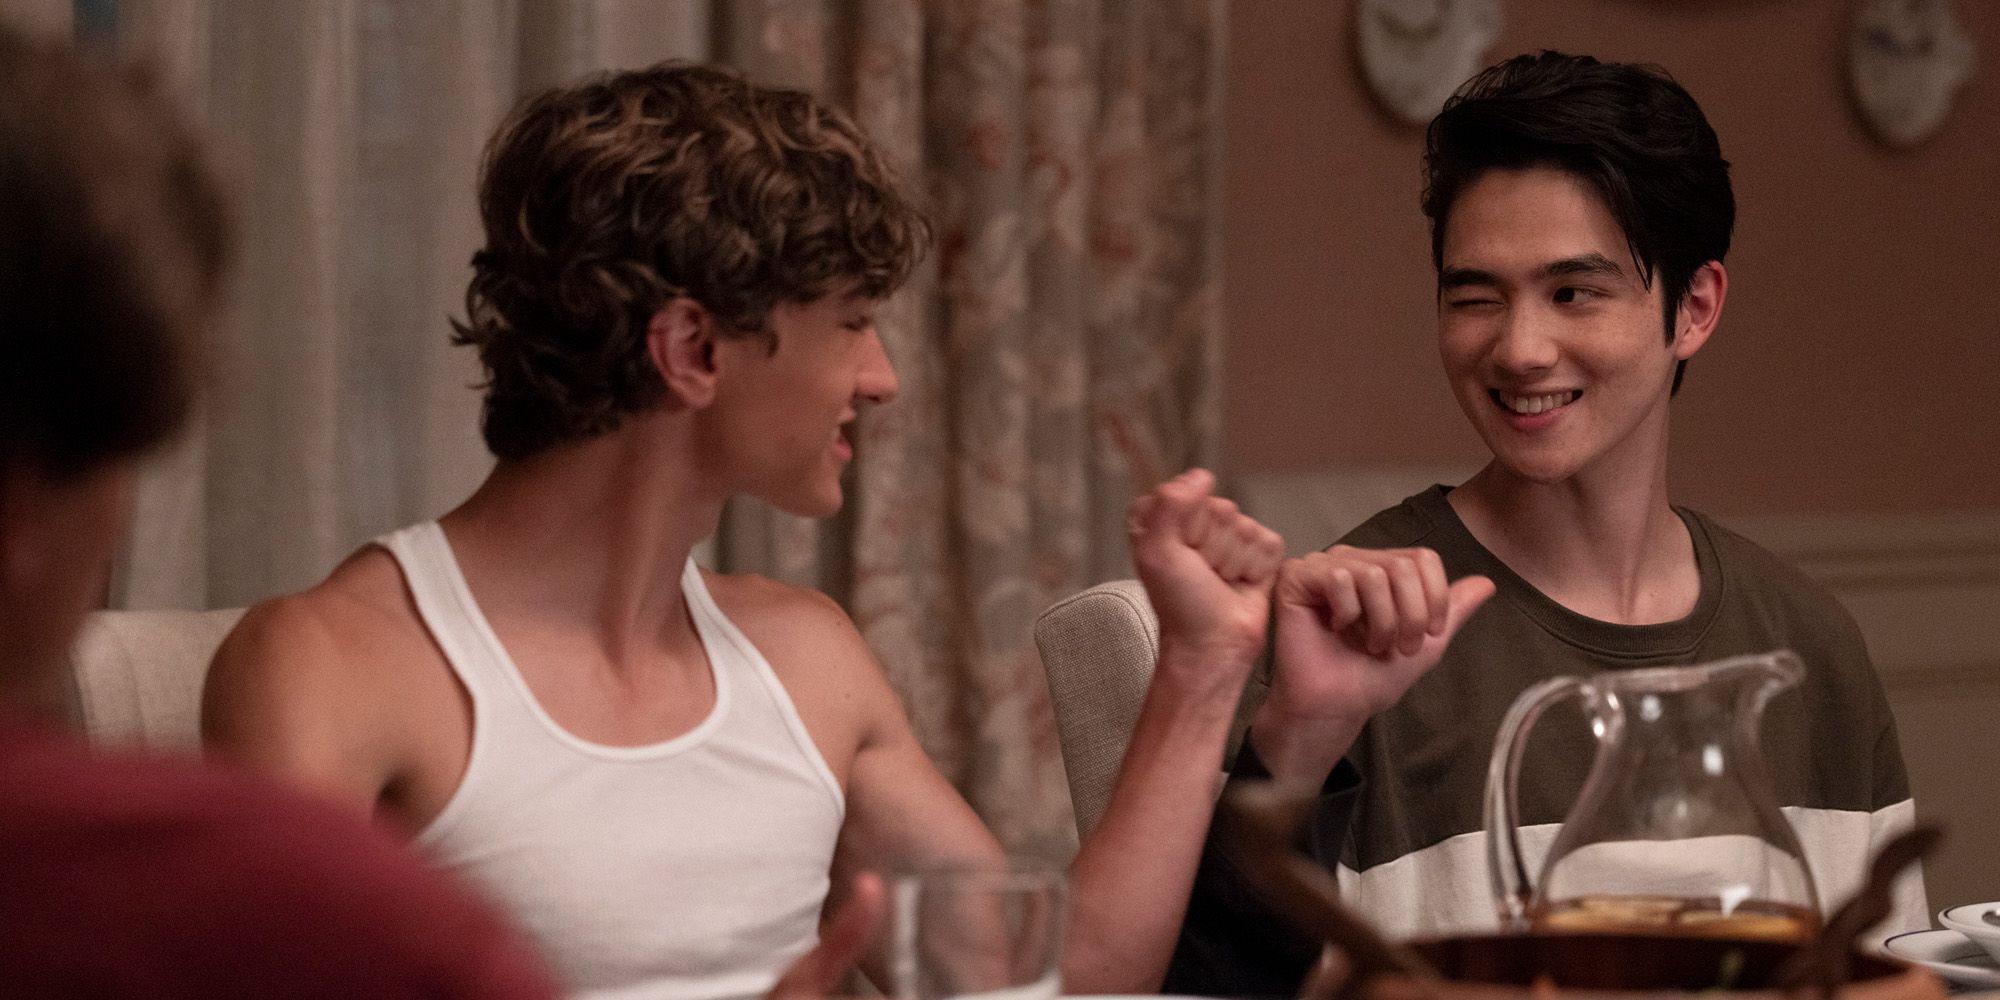 Gavin Casalegno as Jeremiah and Sean Kaufman as Steven fist-bumping at the dinner table in The Summer I Turned Pretty.